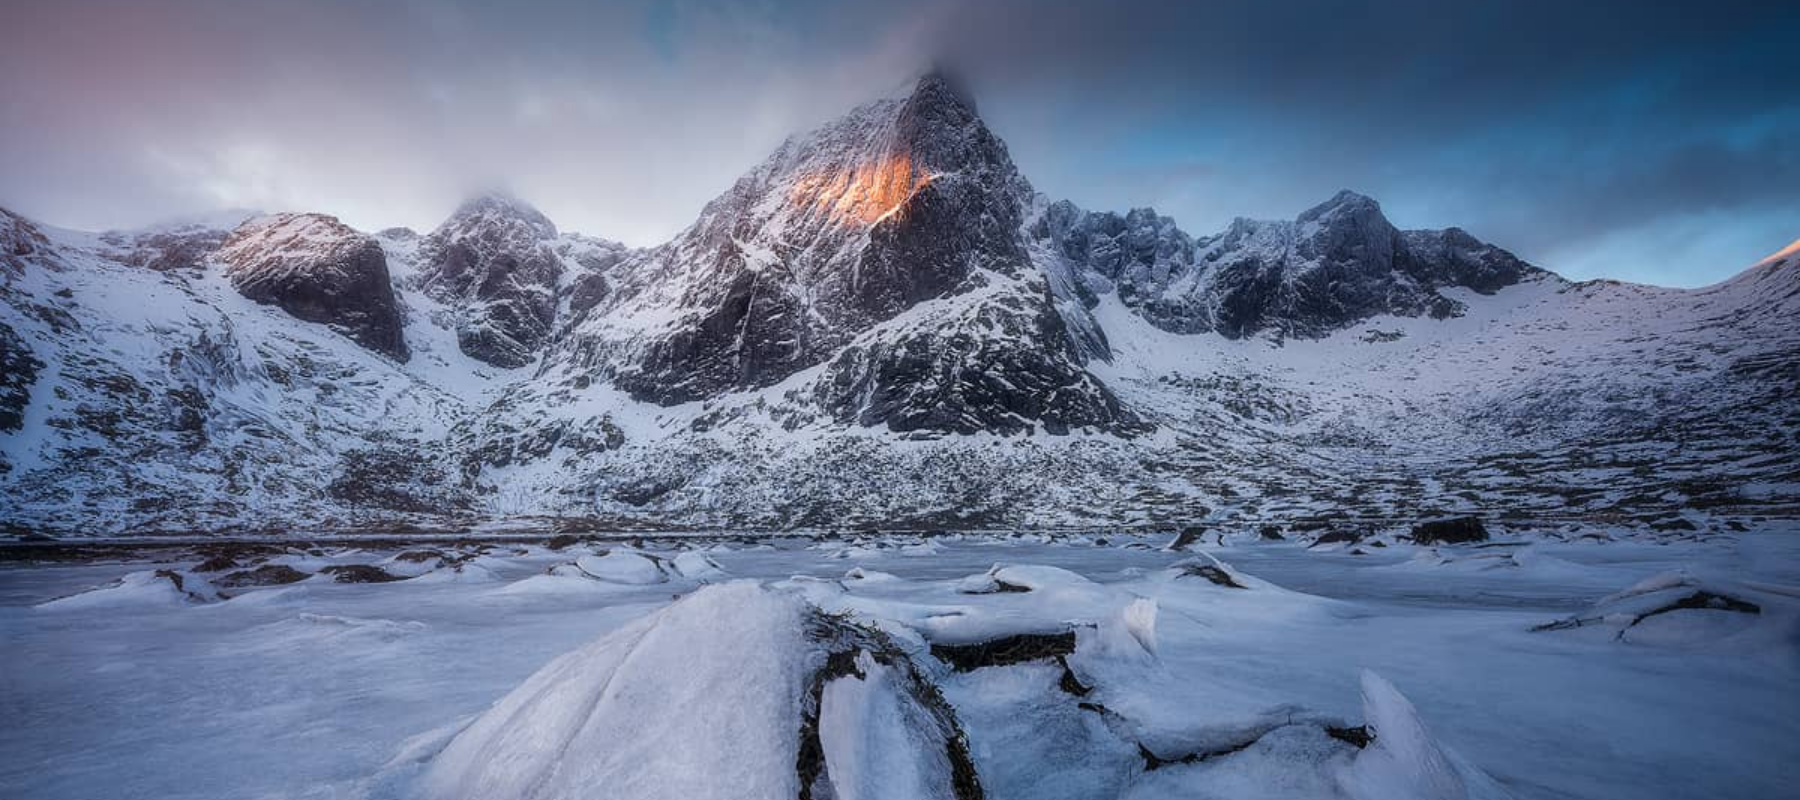 5 Reasons why Norway is a photographer's dream